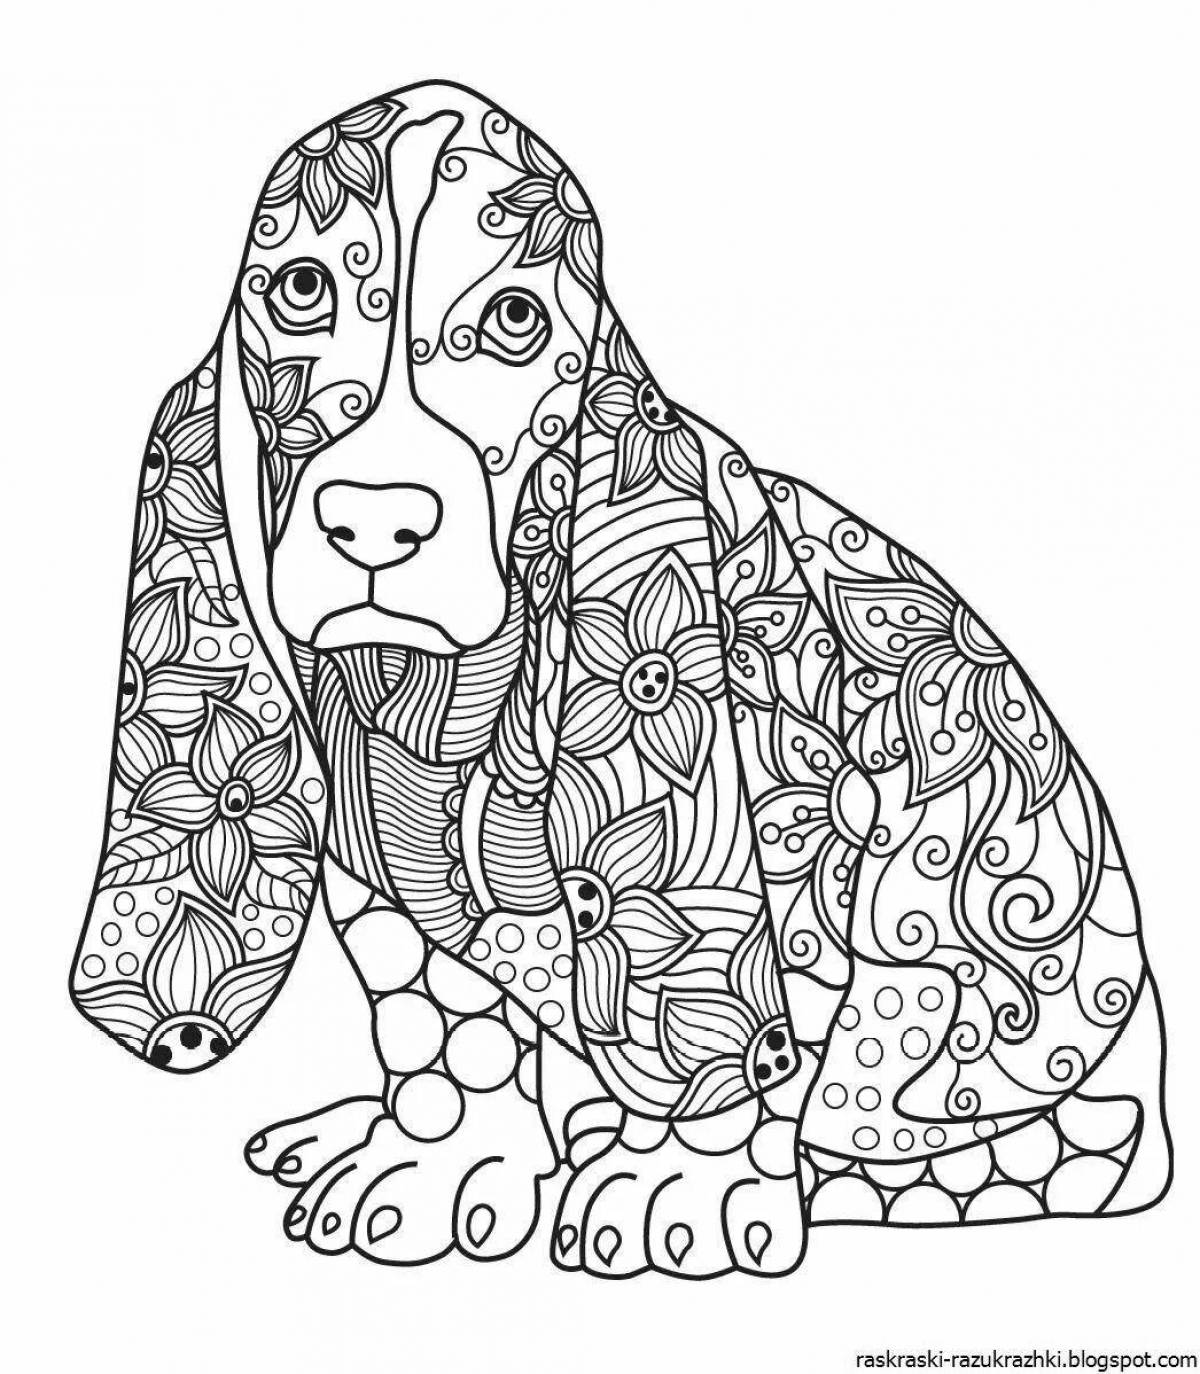 Adorable anti-stress coloring book for girls animals